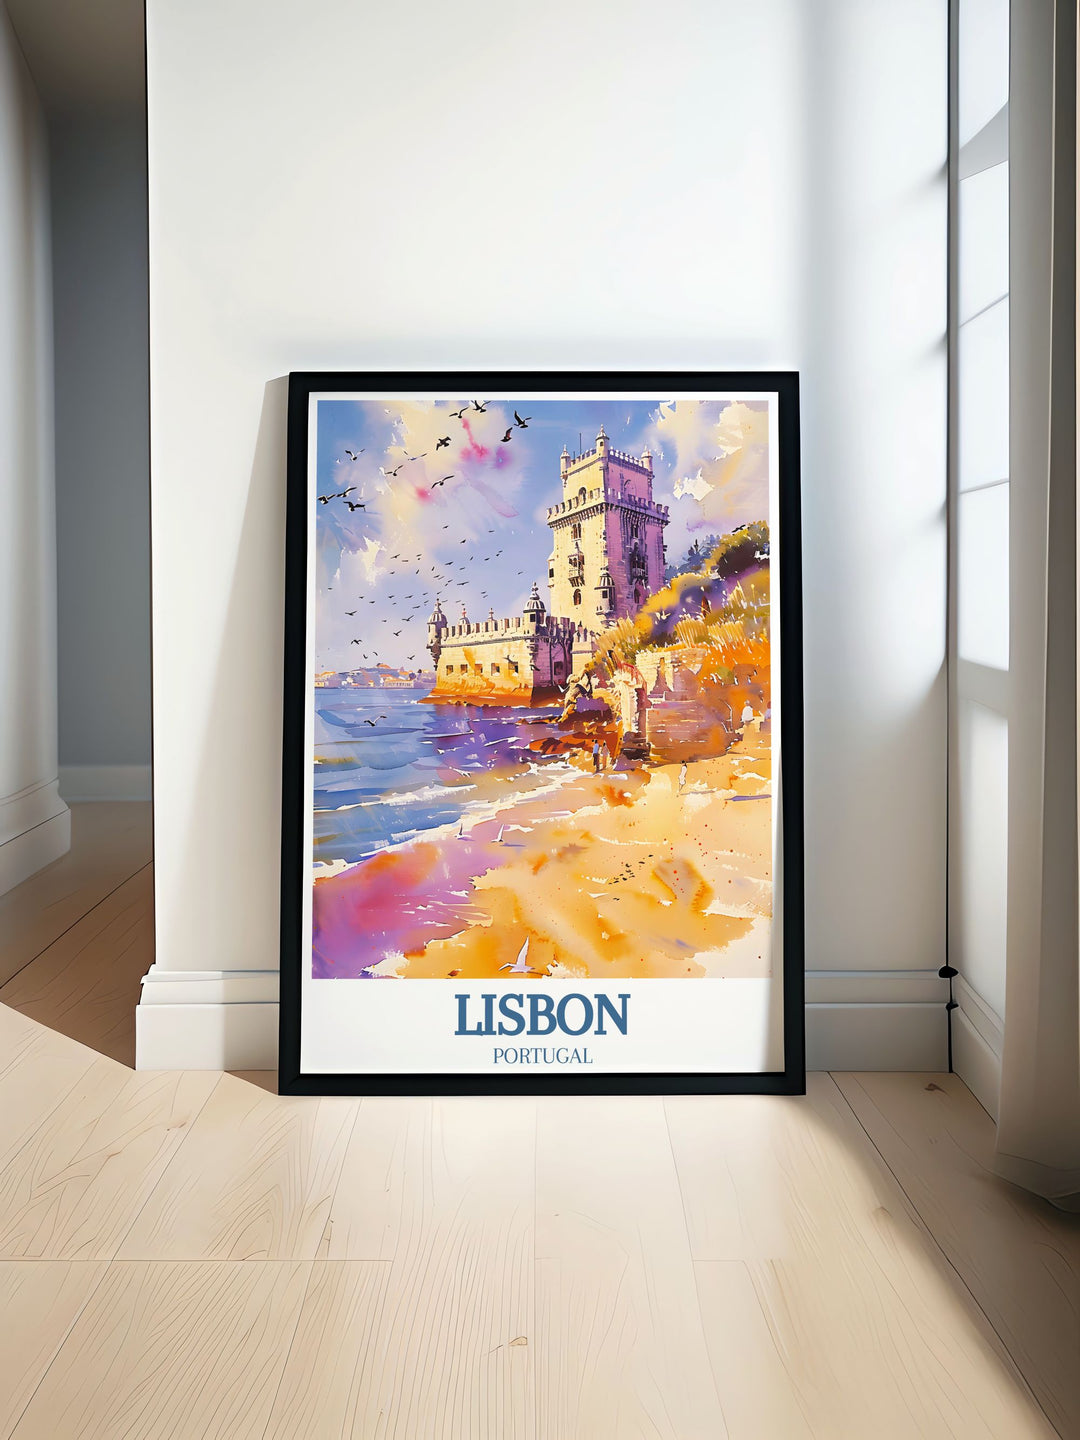 Discover the beauty of Portugal with our Belem Tower Tagus river travel art perfect for adding elegance to any room with its vibrant colors and rich history captured in a stunning minimal poster